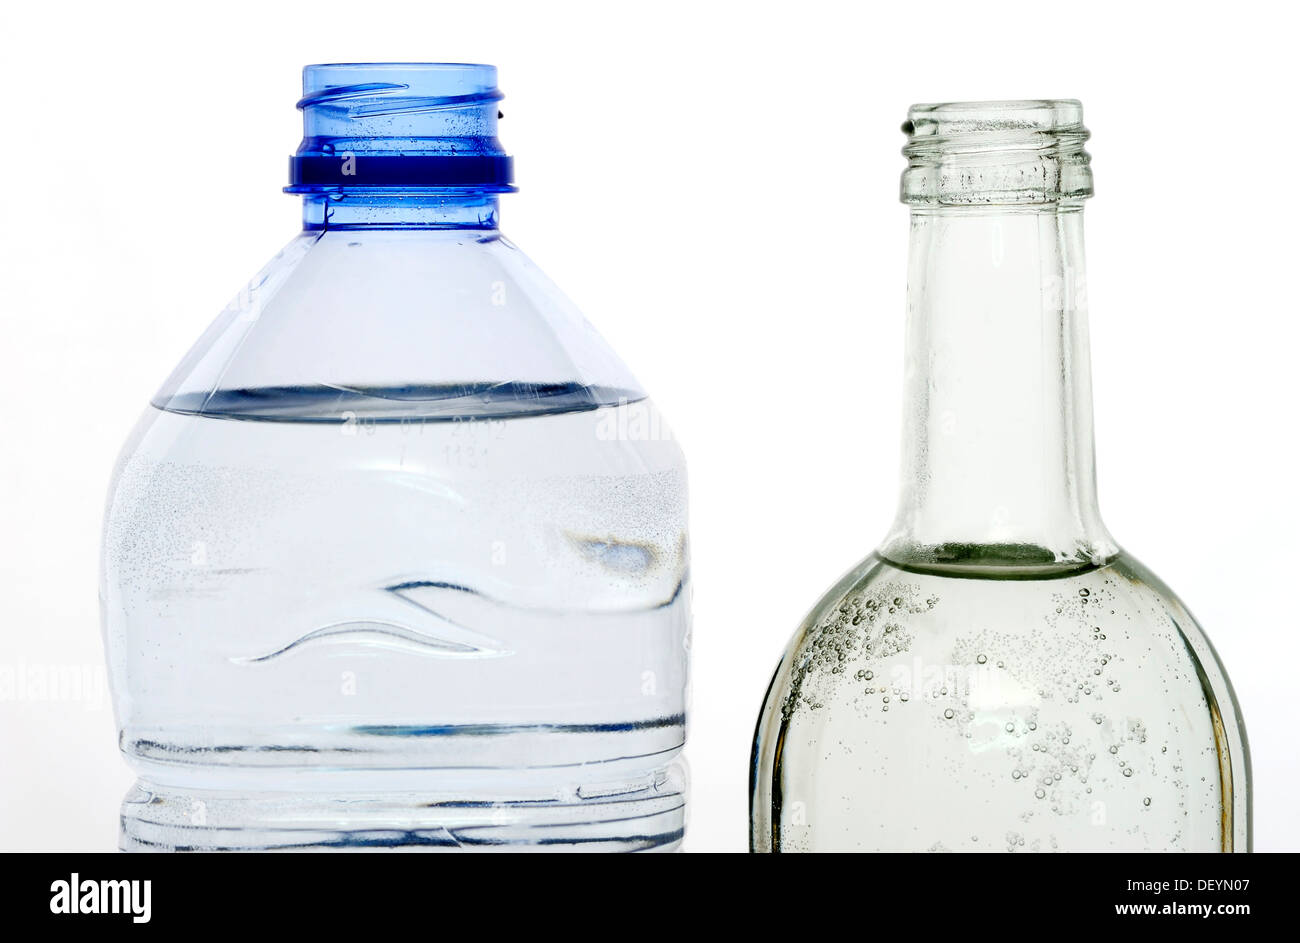 Water bottles made of glass and PVC Stock Photo